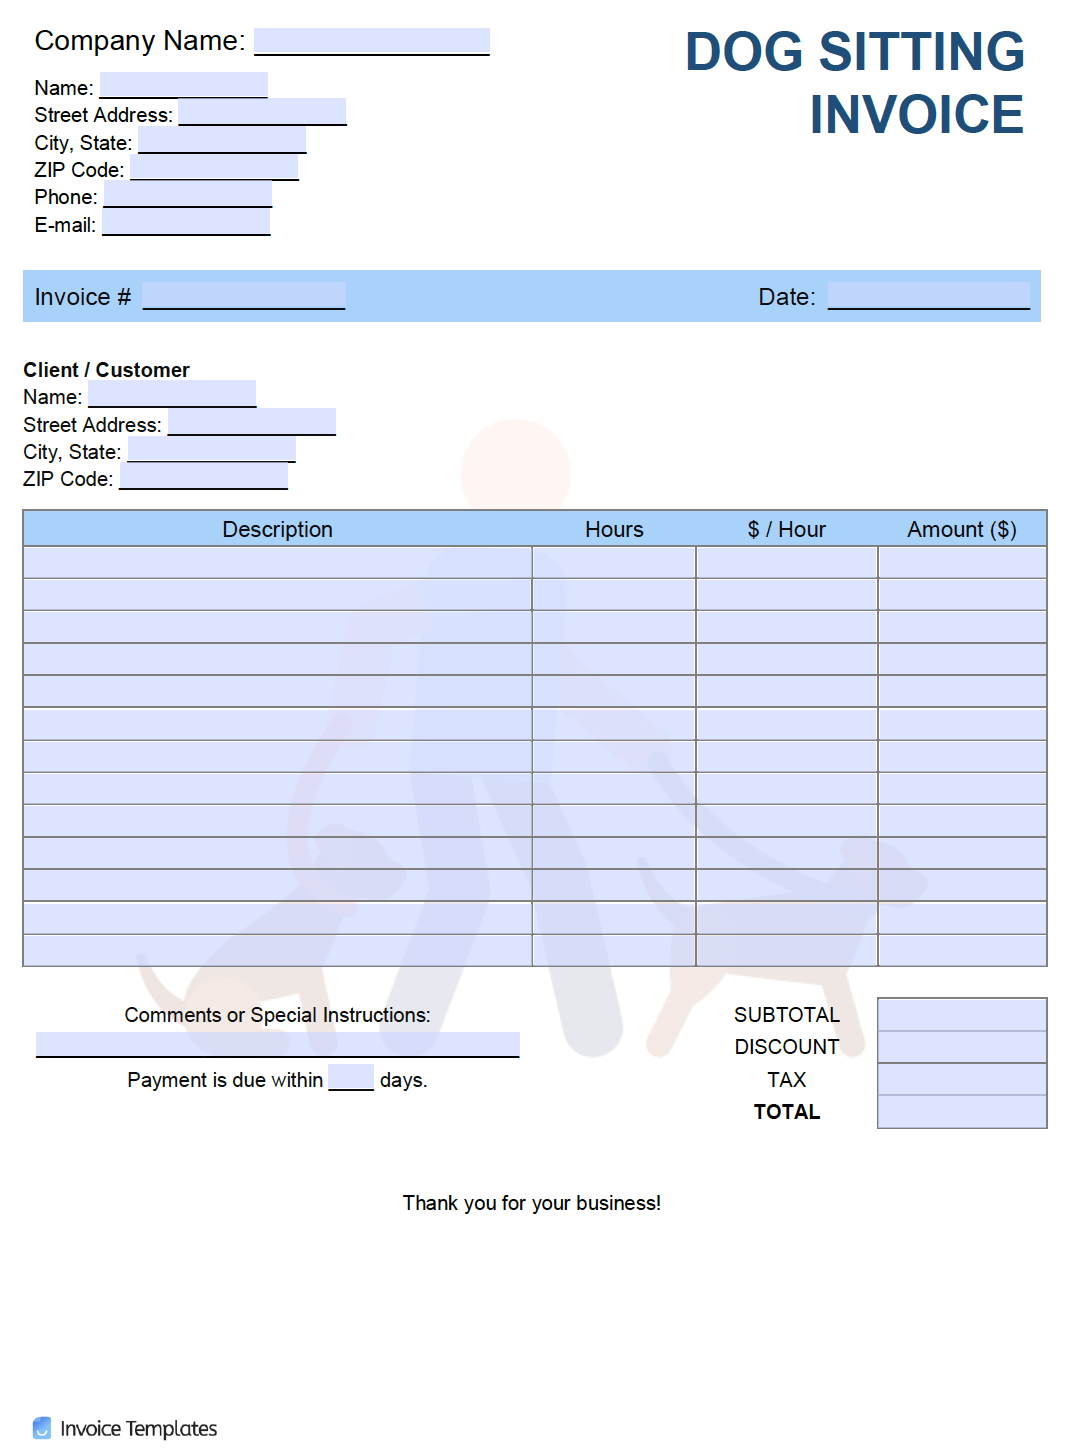 dog-sitting-invoice-template